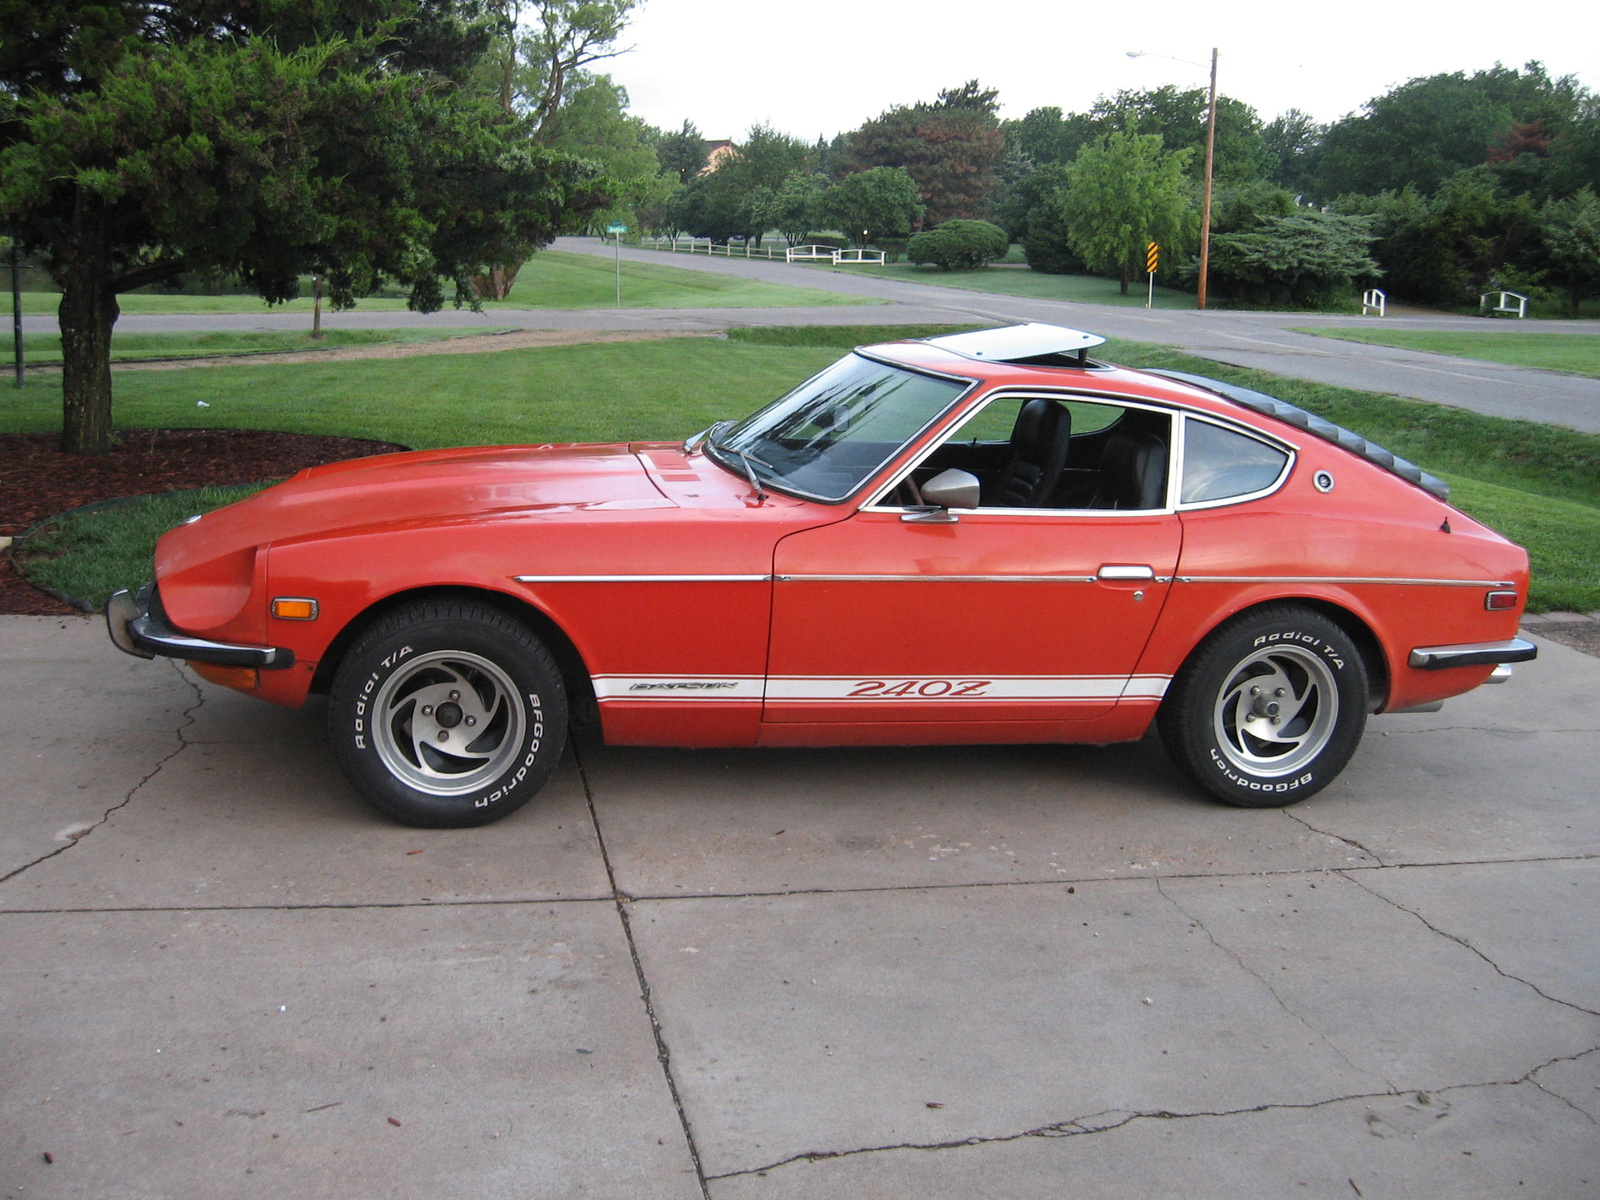 1973 240Z nissan picture #3